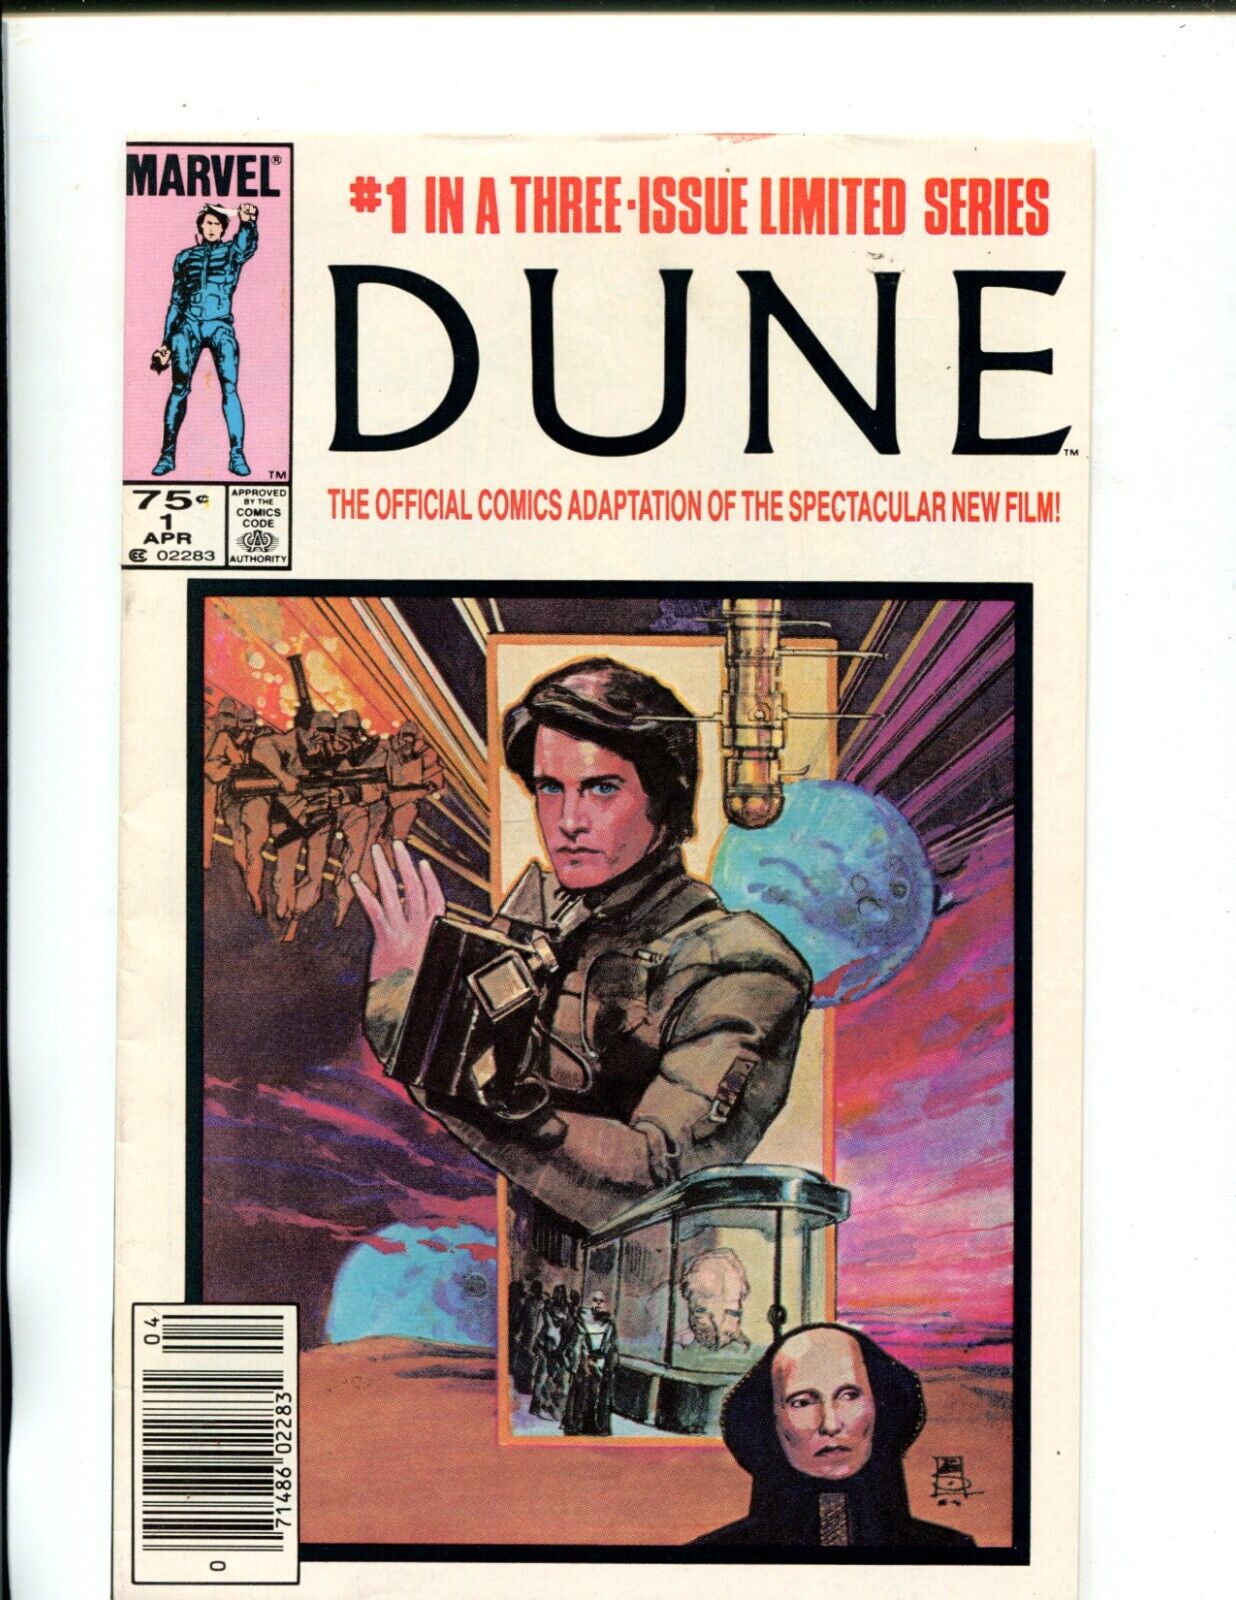 Dune #1-3 Limited Series  1985